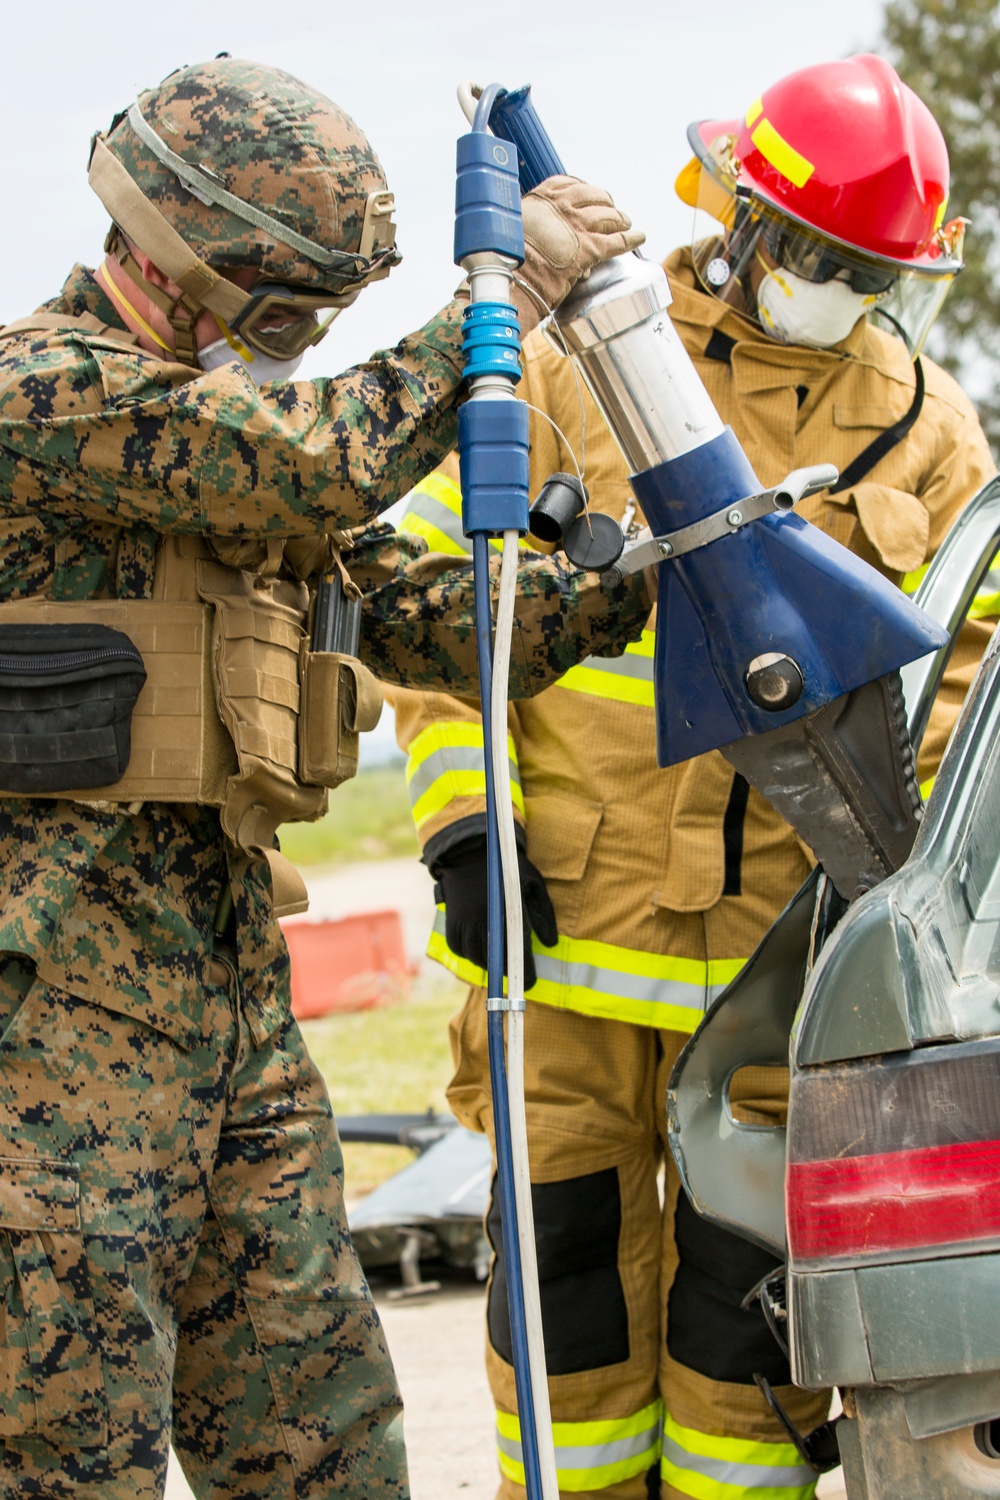 SPMAGTF-CR-AF Marines &amp; Spanish firefighters conduct vehicle extrication training